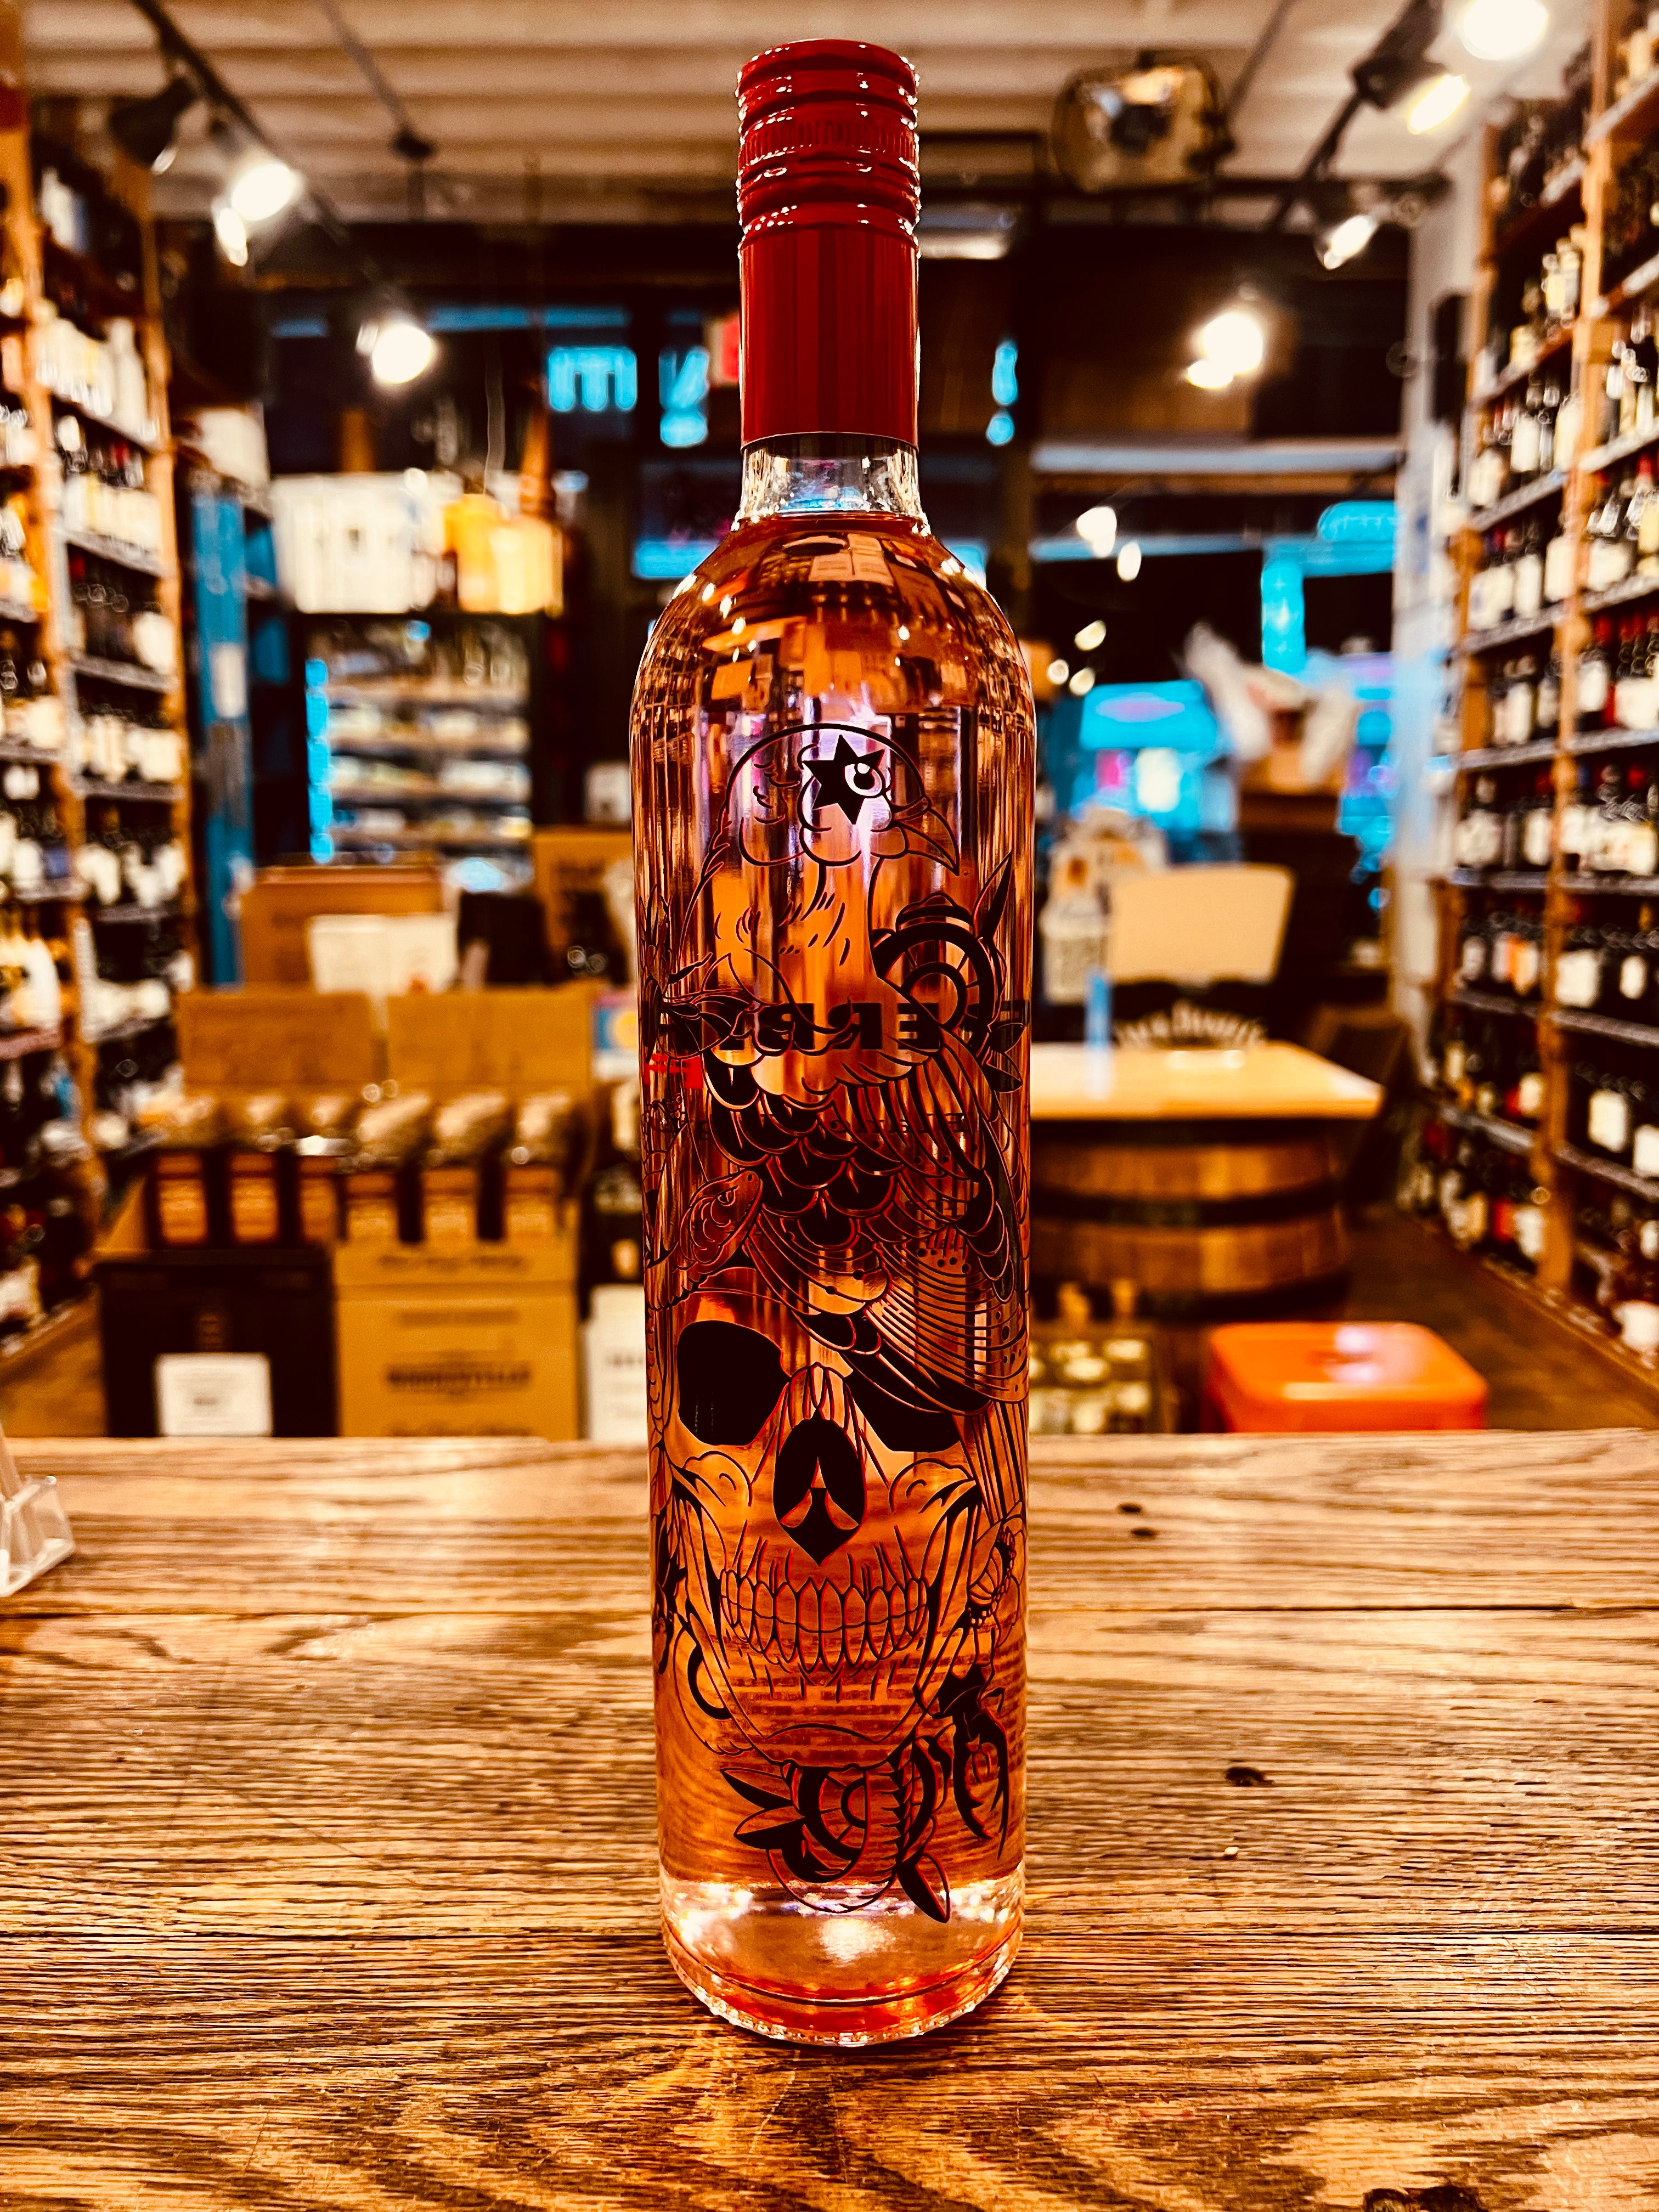 Superbird Fuego 750ml Tequila a tall slender clear glass bottle with a red top and the image of a skull and eagle on the bottle